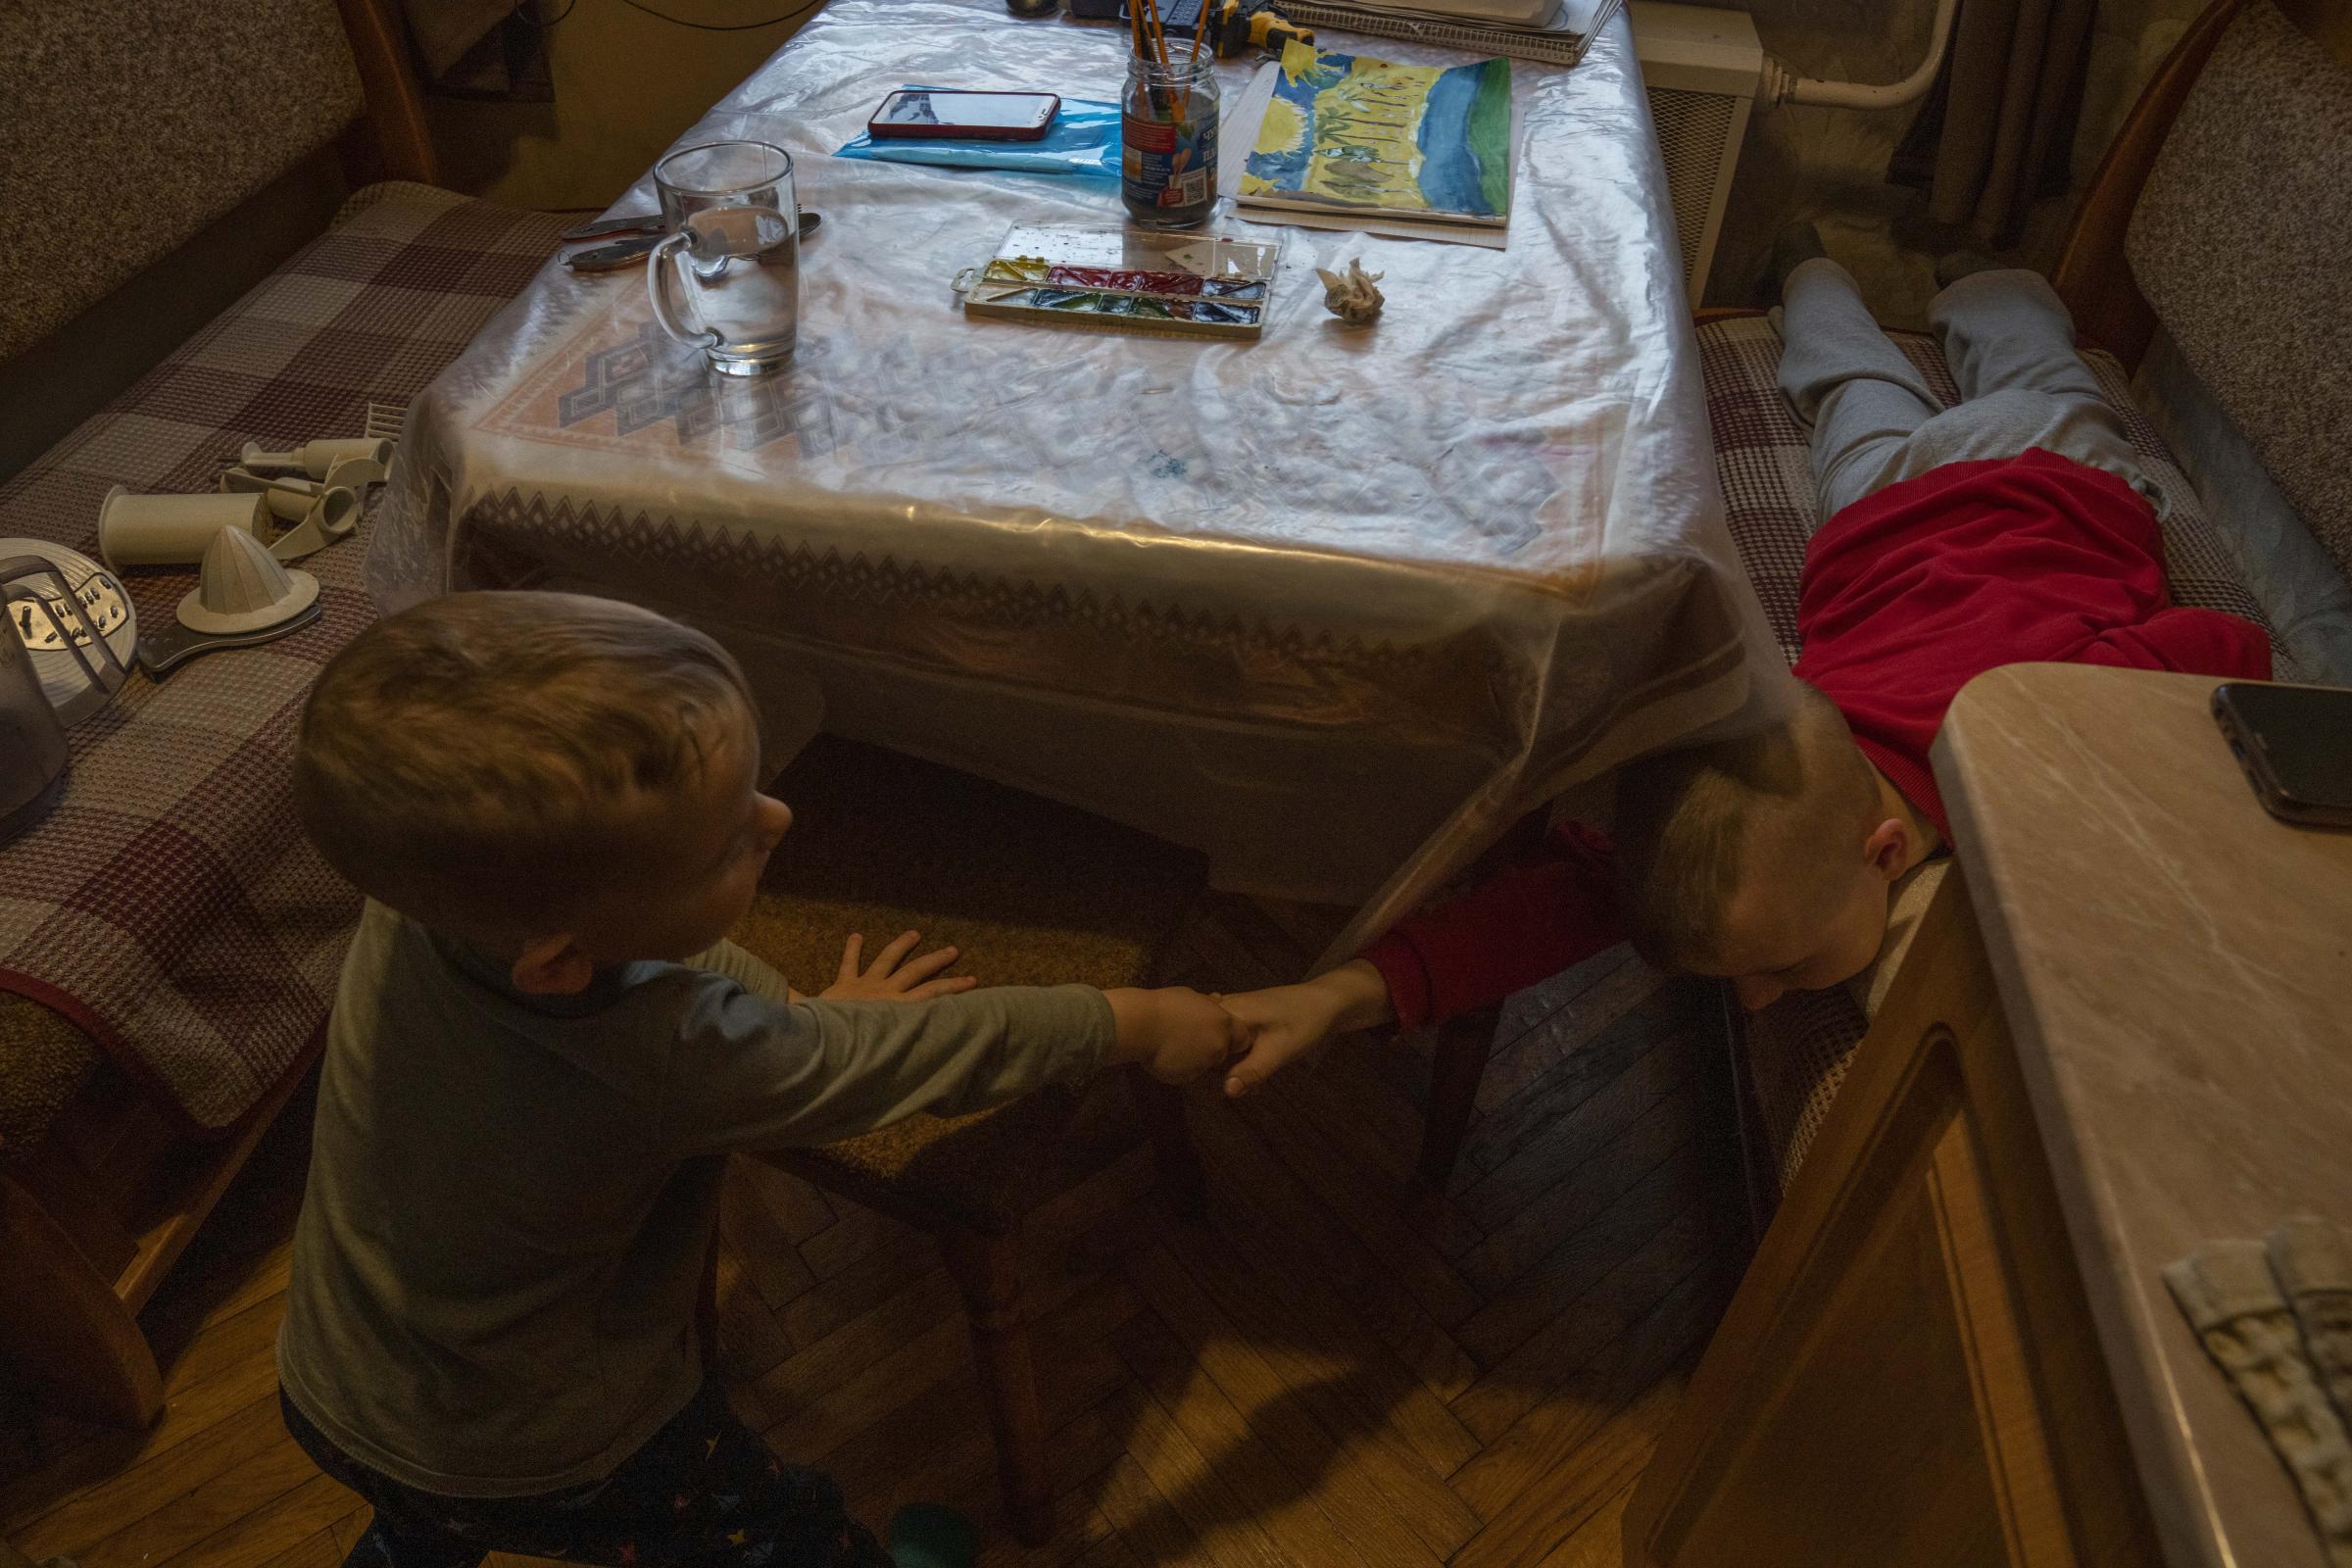 Makar, and his 6-year-old brother Nazar, play at an apartment where they took refuge after fleeing their home in Kyiv.